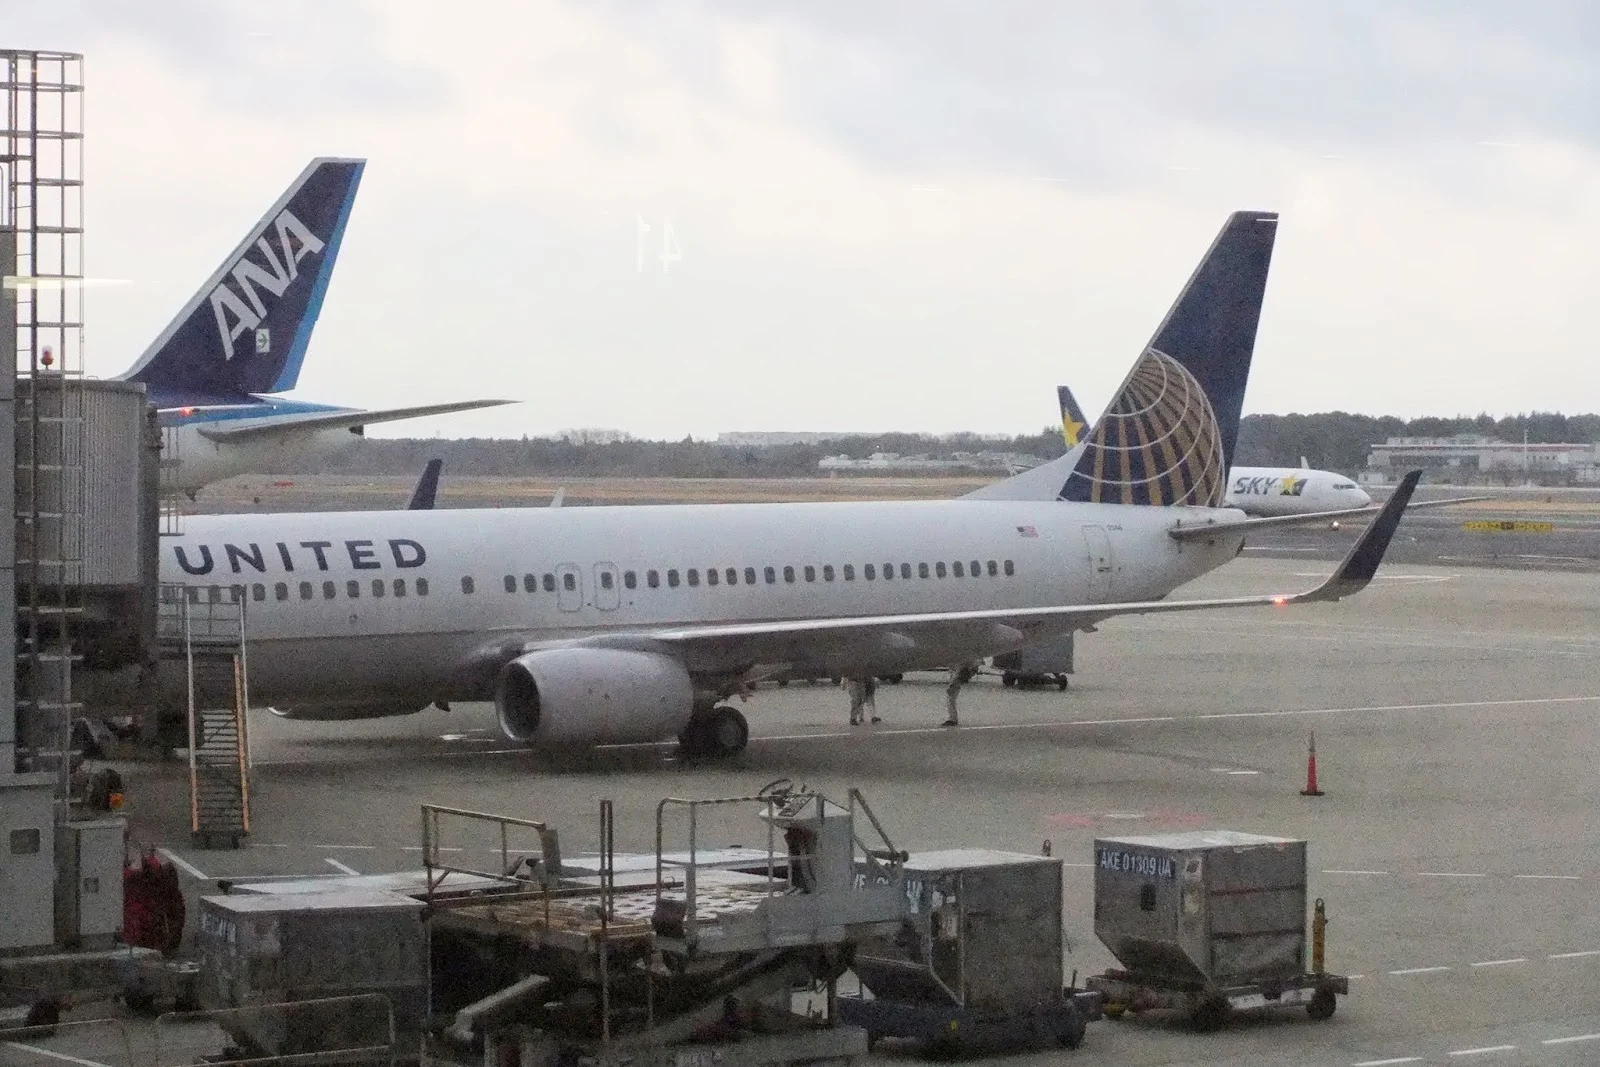 united-airlines-737　ユナイテッドエアラインズ737